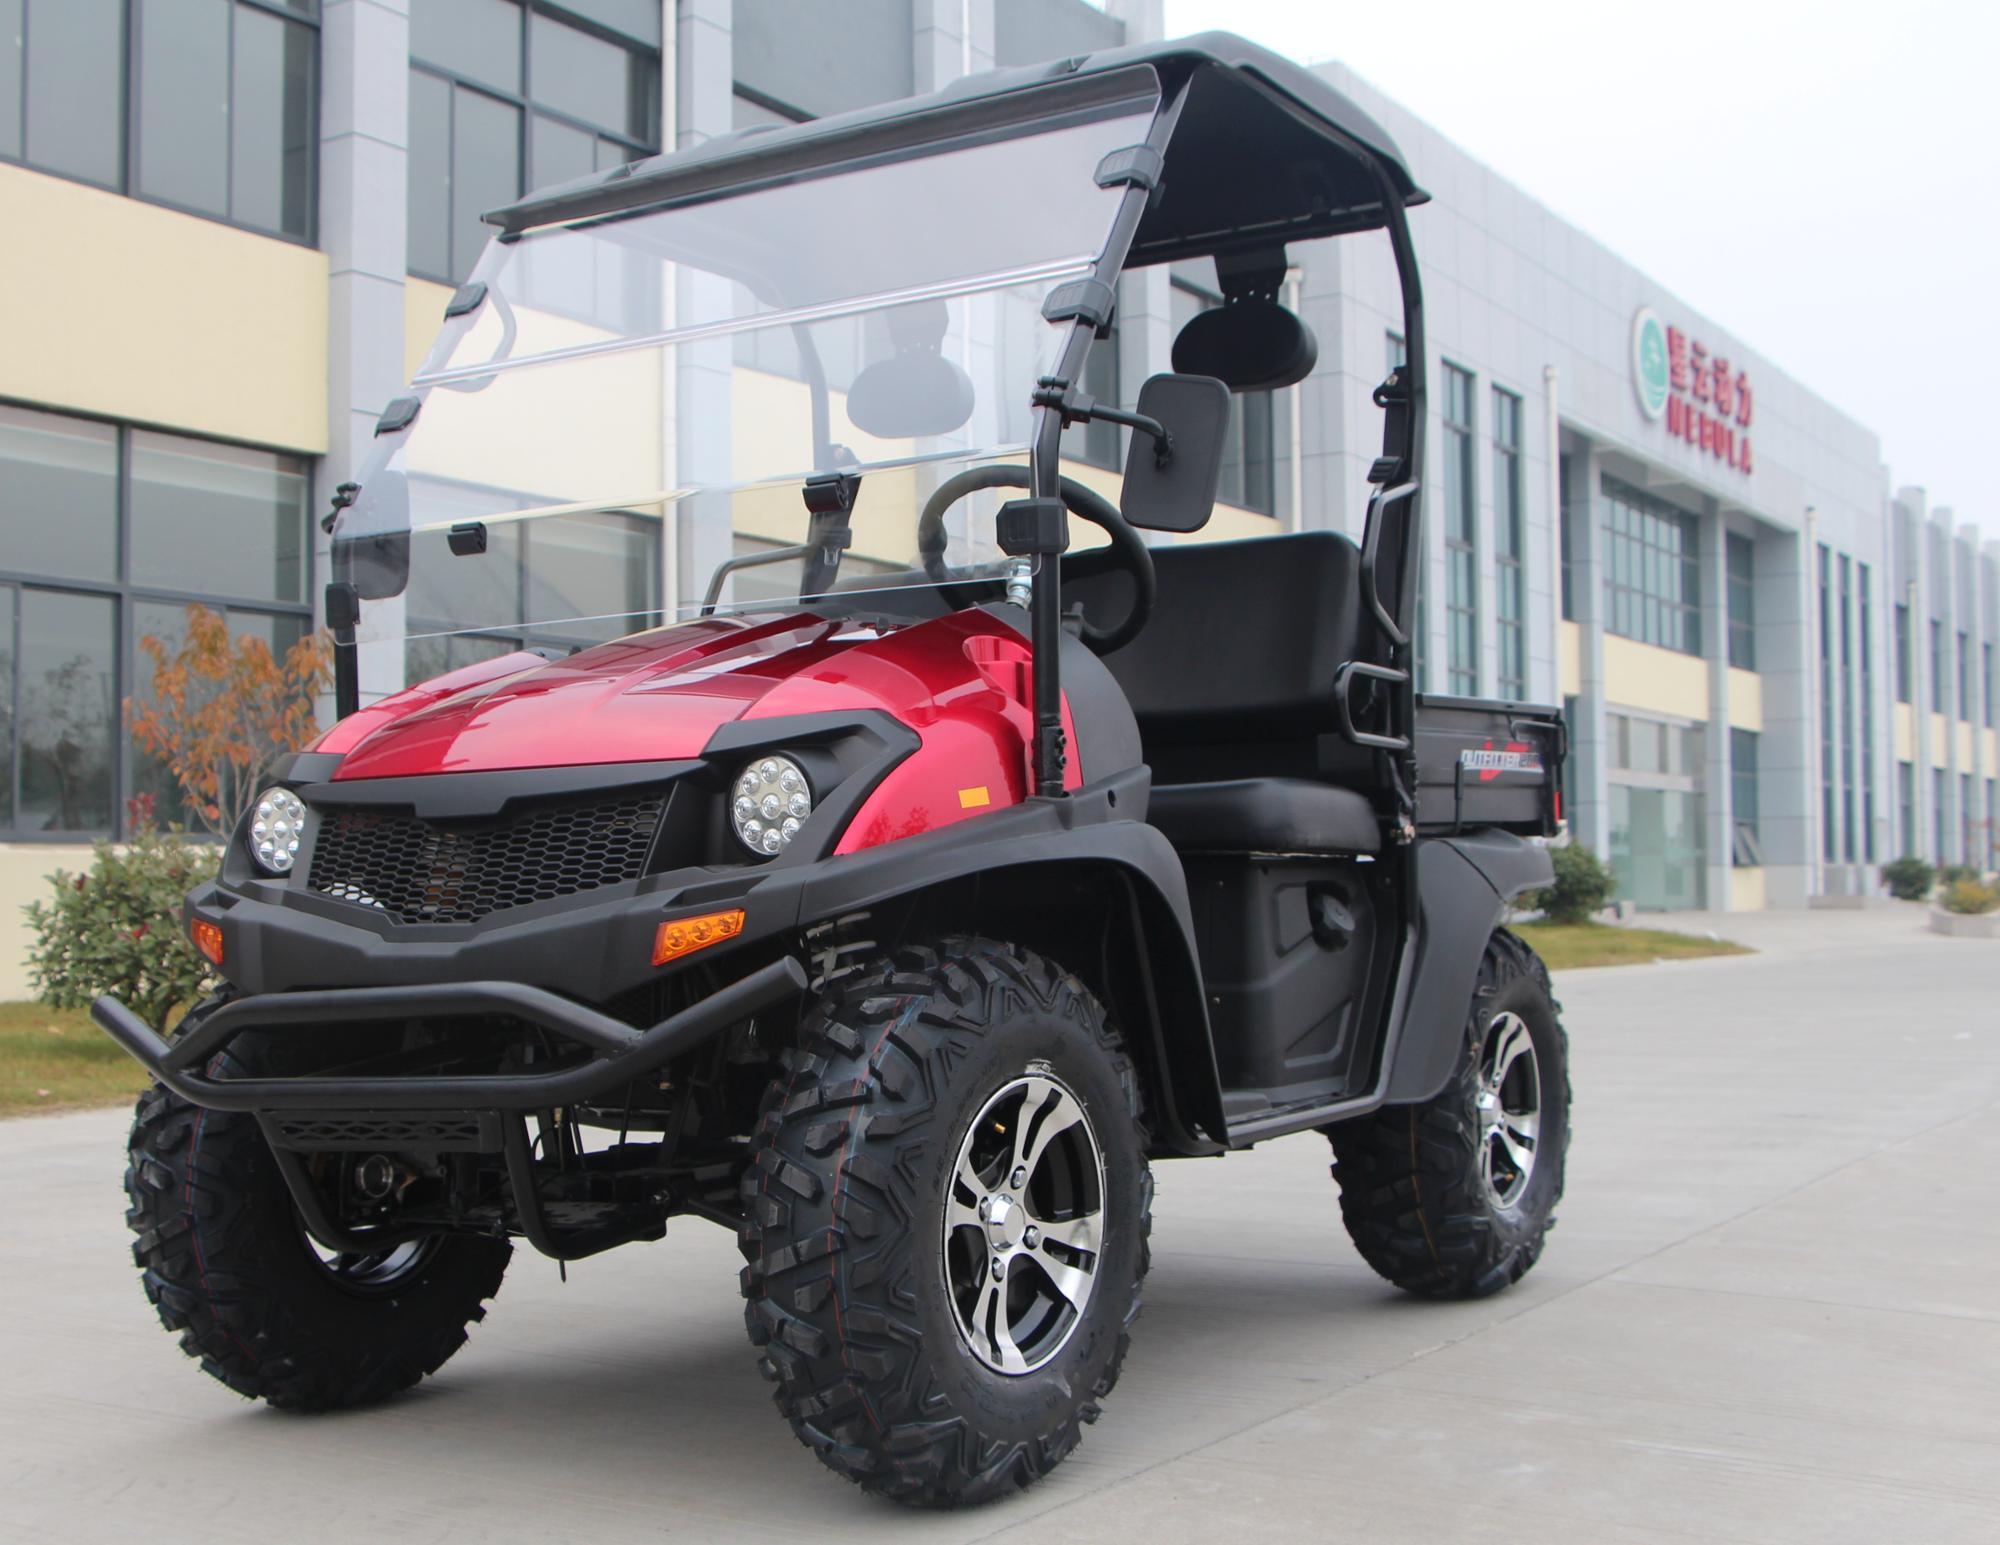 2020 Hot Sale High and low speed shift EFI 200CC UTV with EPA for Adults